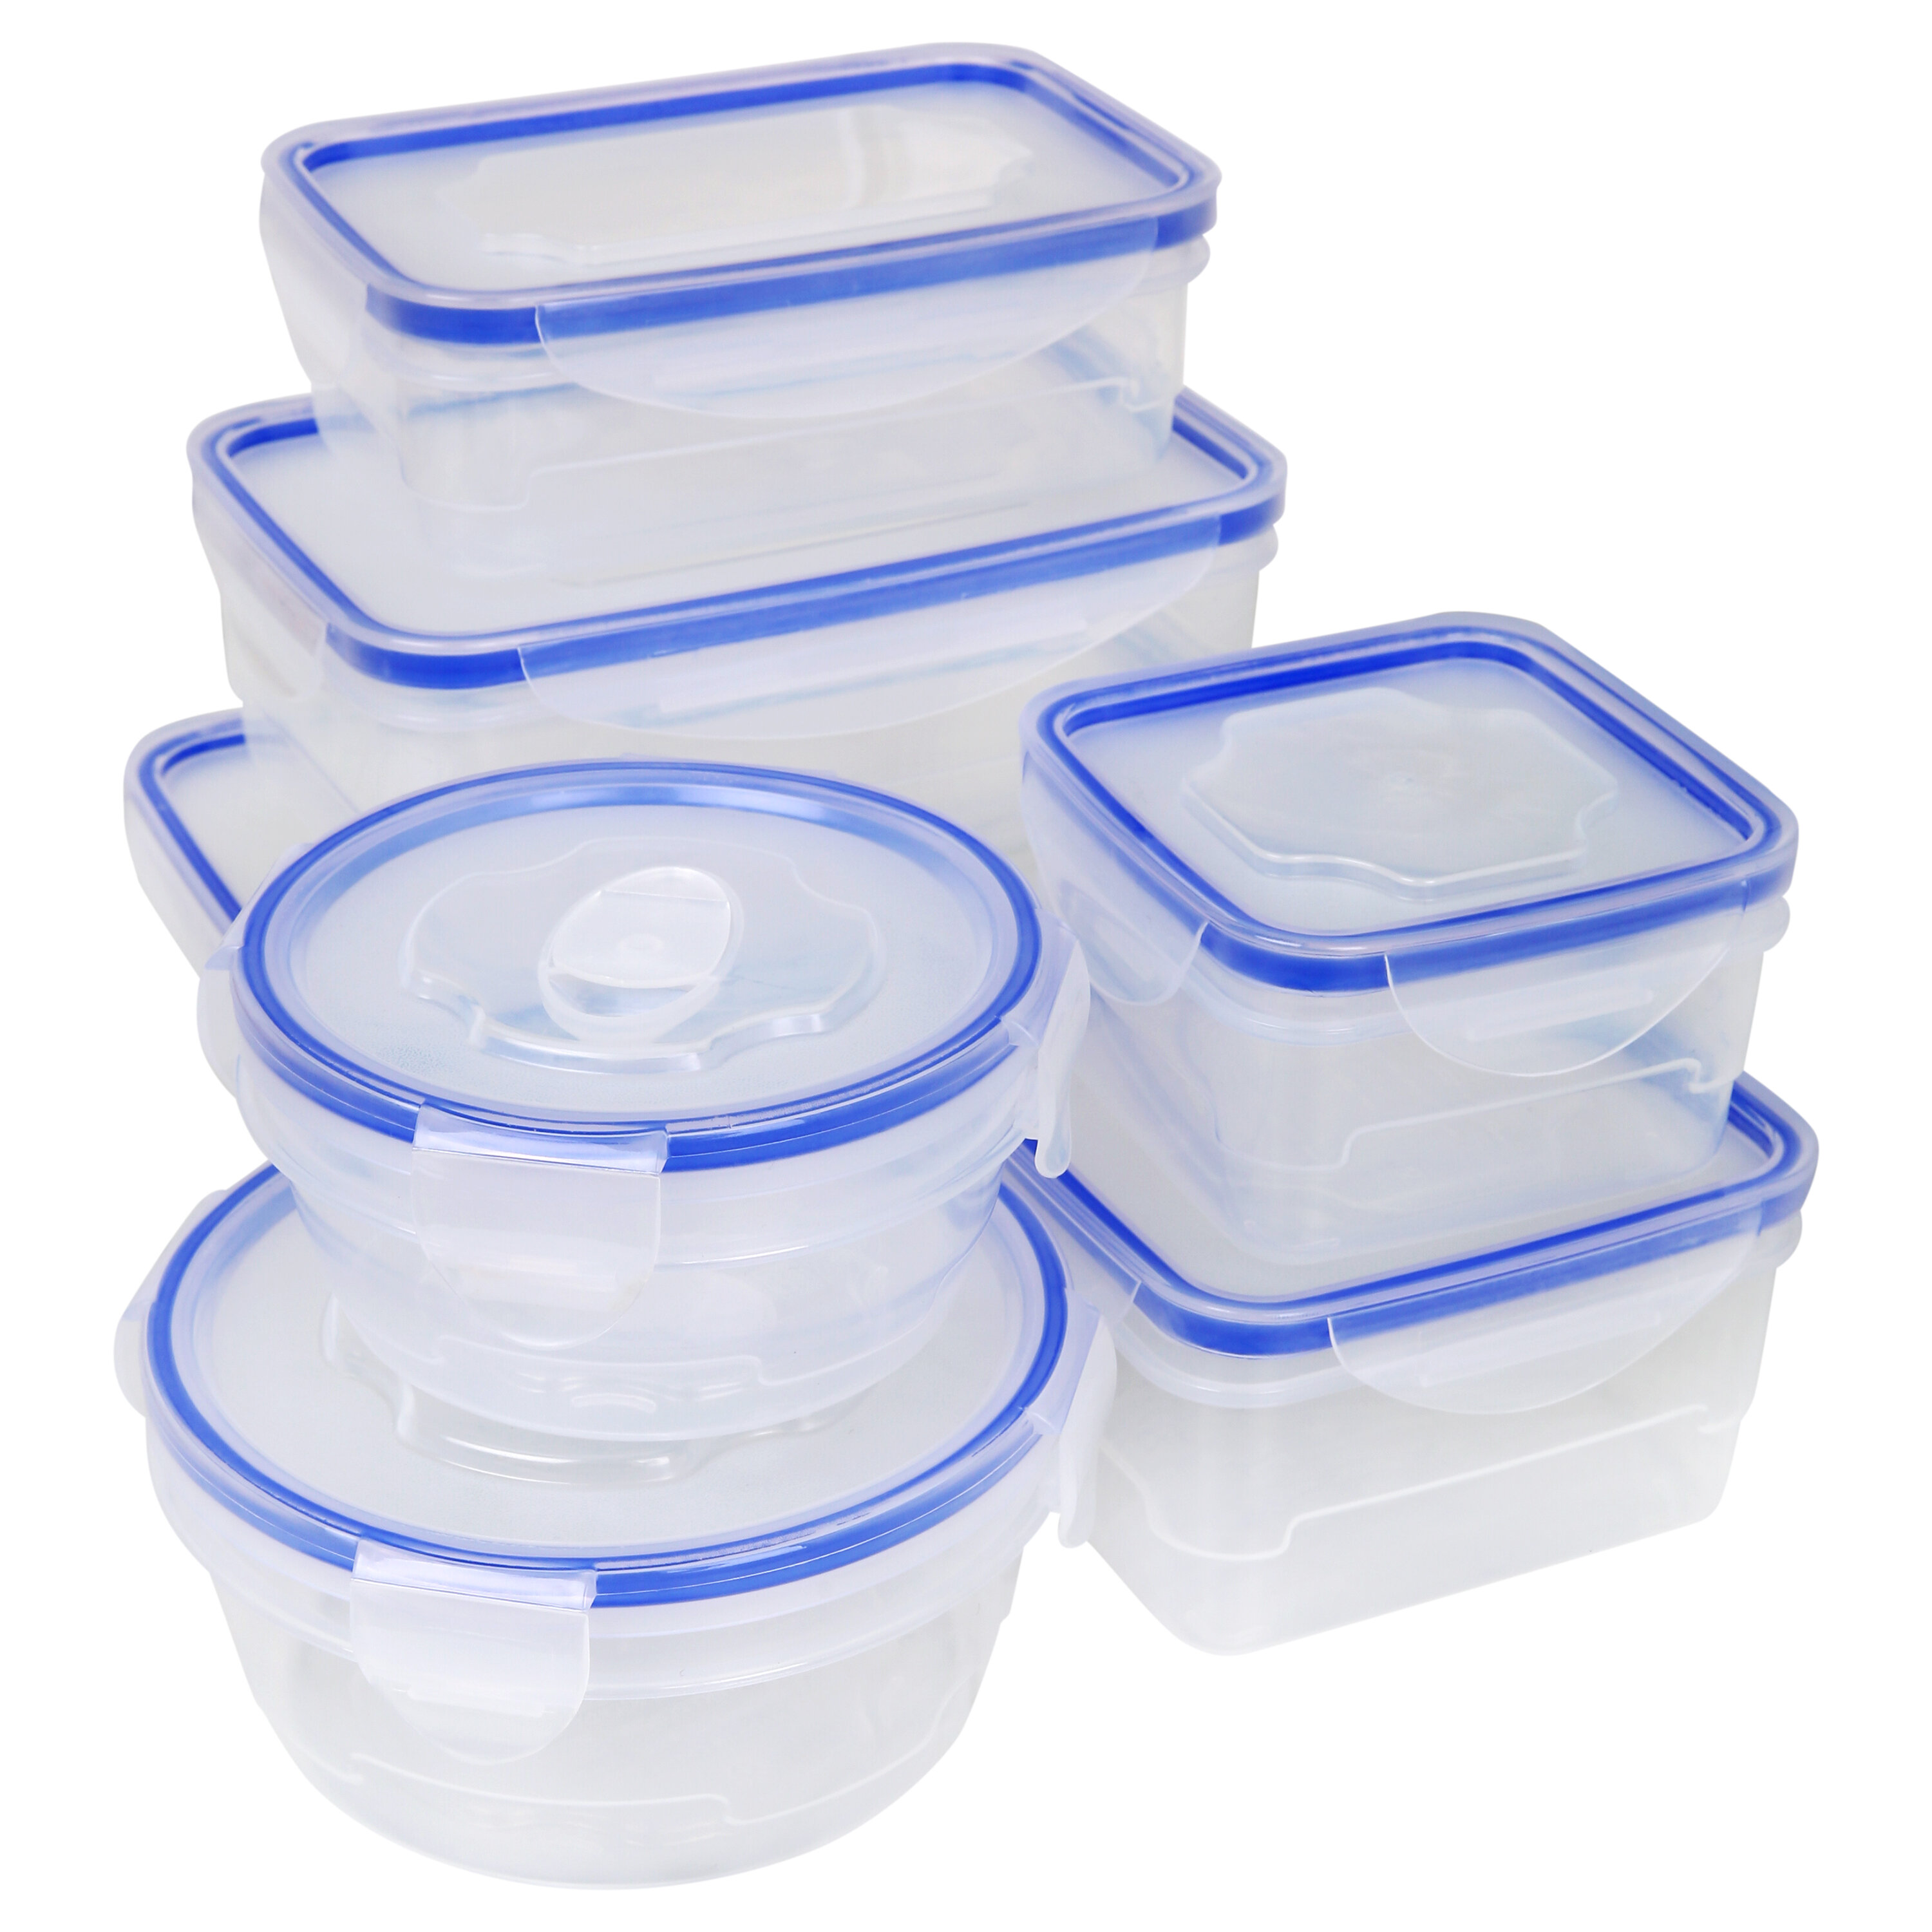 ColorLife 10-Pc Plastic Food Storage Containers Set With Lids, 3